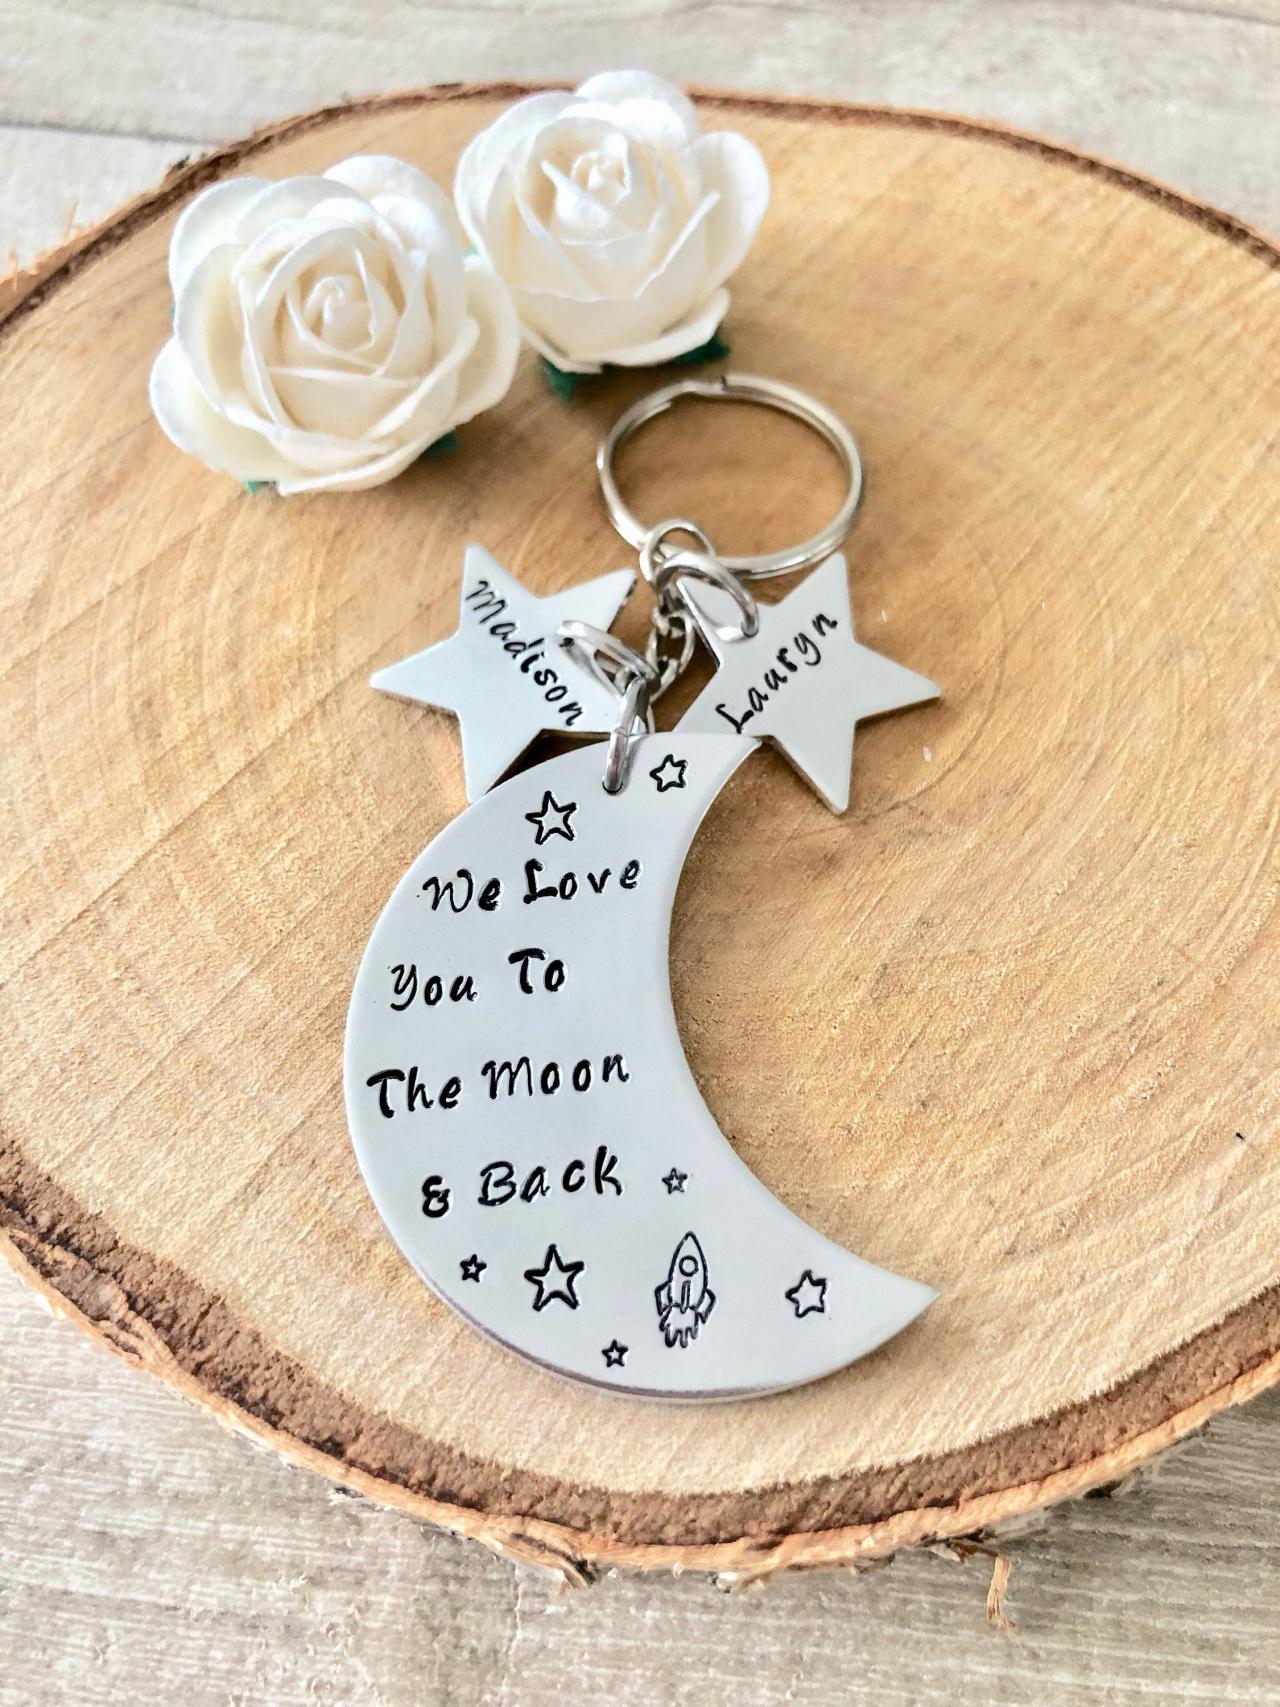 I Love You, To The Moon, Mom Gift, Dad Gift, From The Kids, Grandma Gift, Grandpa Gift, Mothers Day Gift, Fathers Day Gift, Birthday Gift